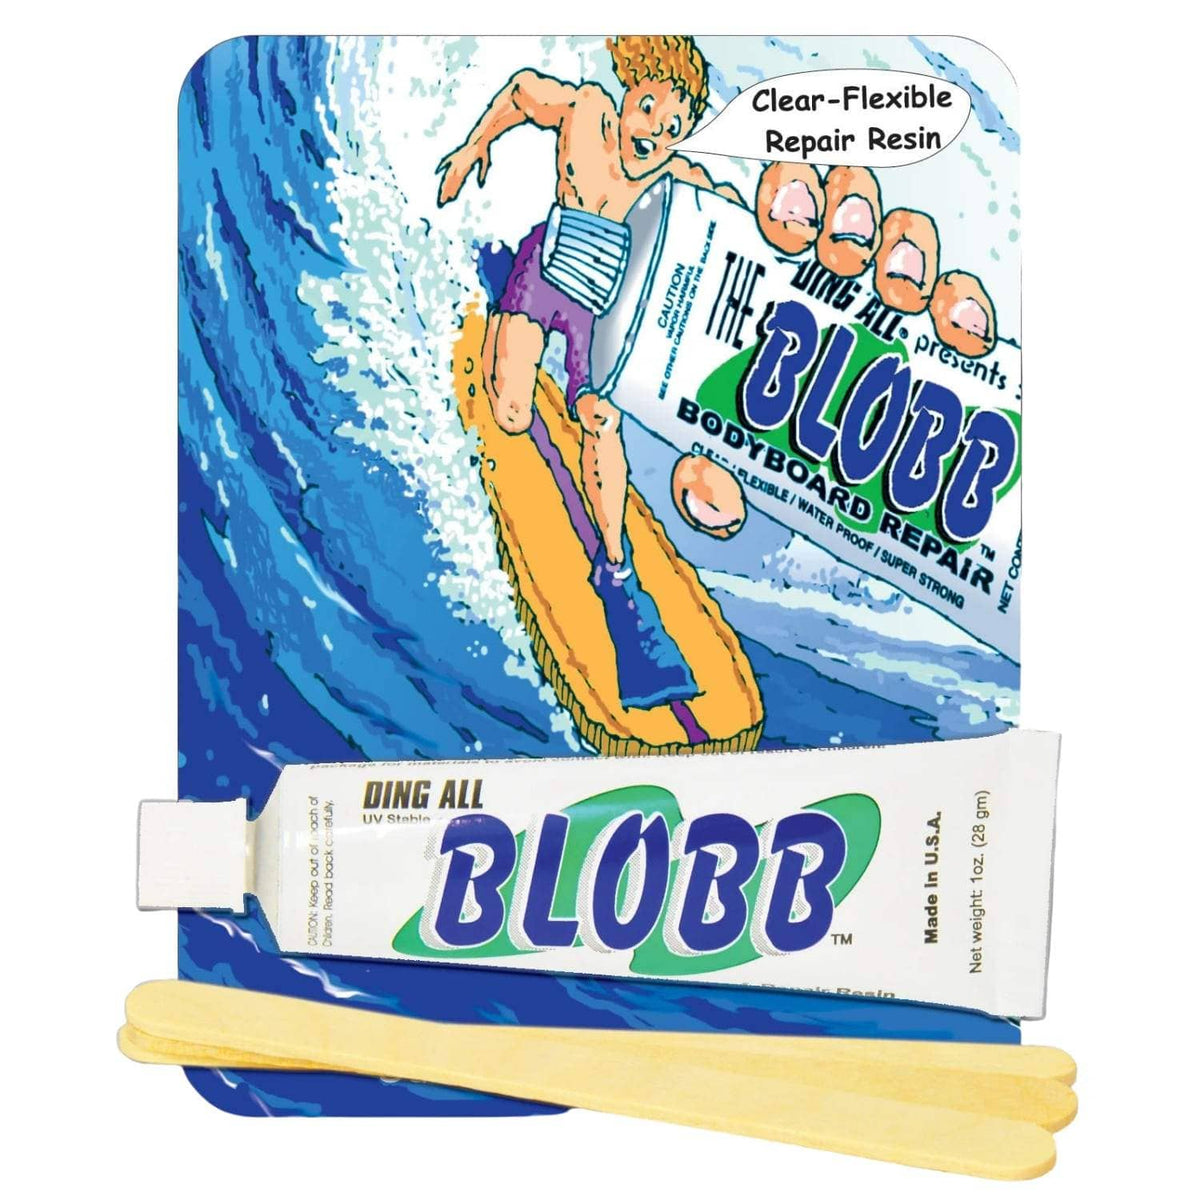 Ding All The Blobb - Wetsuit / Bodyboard / Fin Repair N/A 1oz - Wetsuit Repair Glue by Ding All